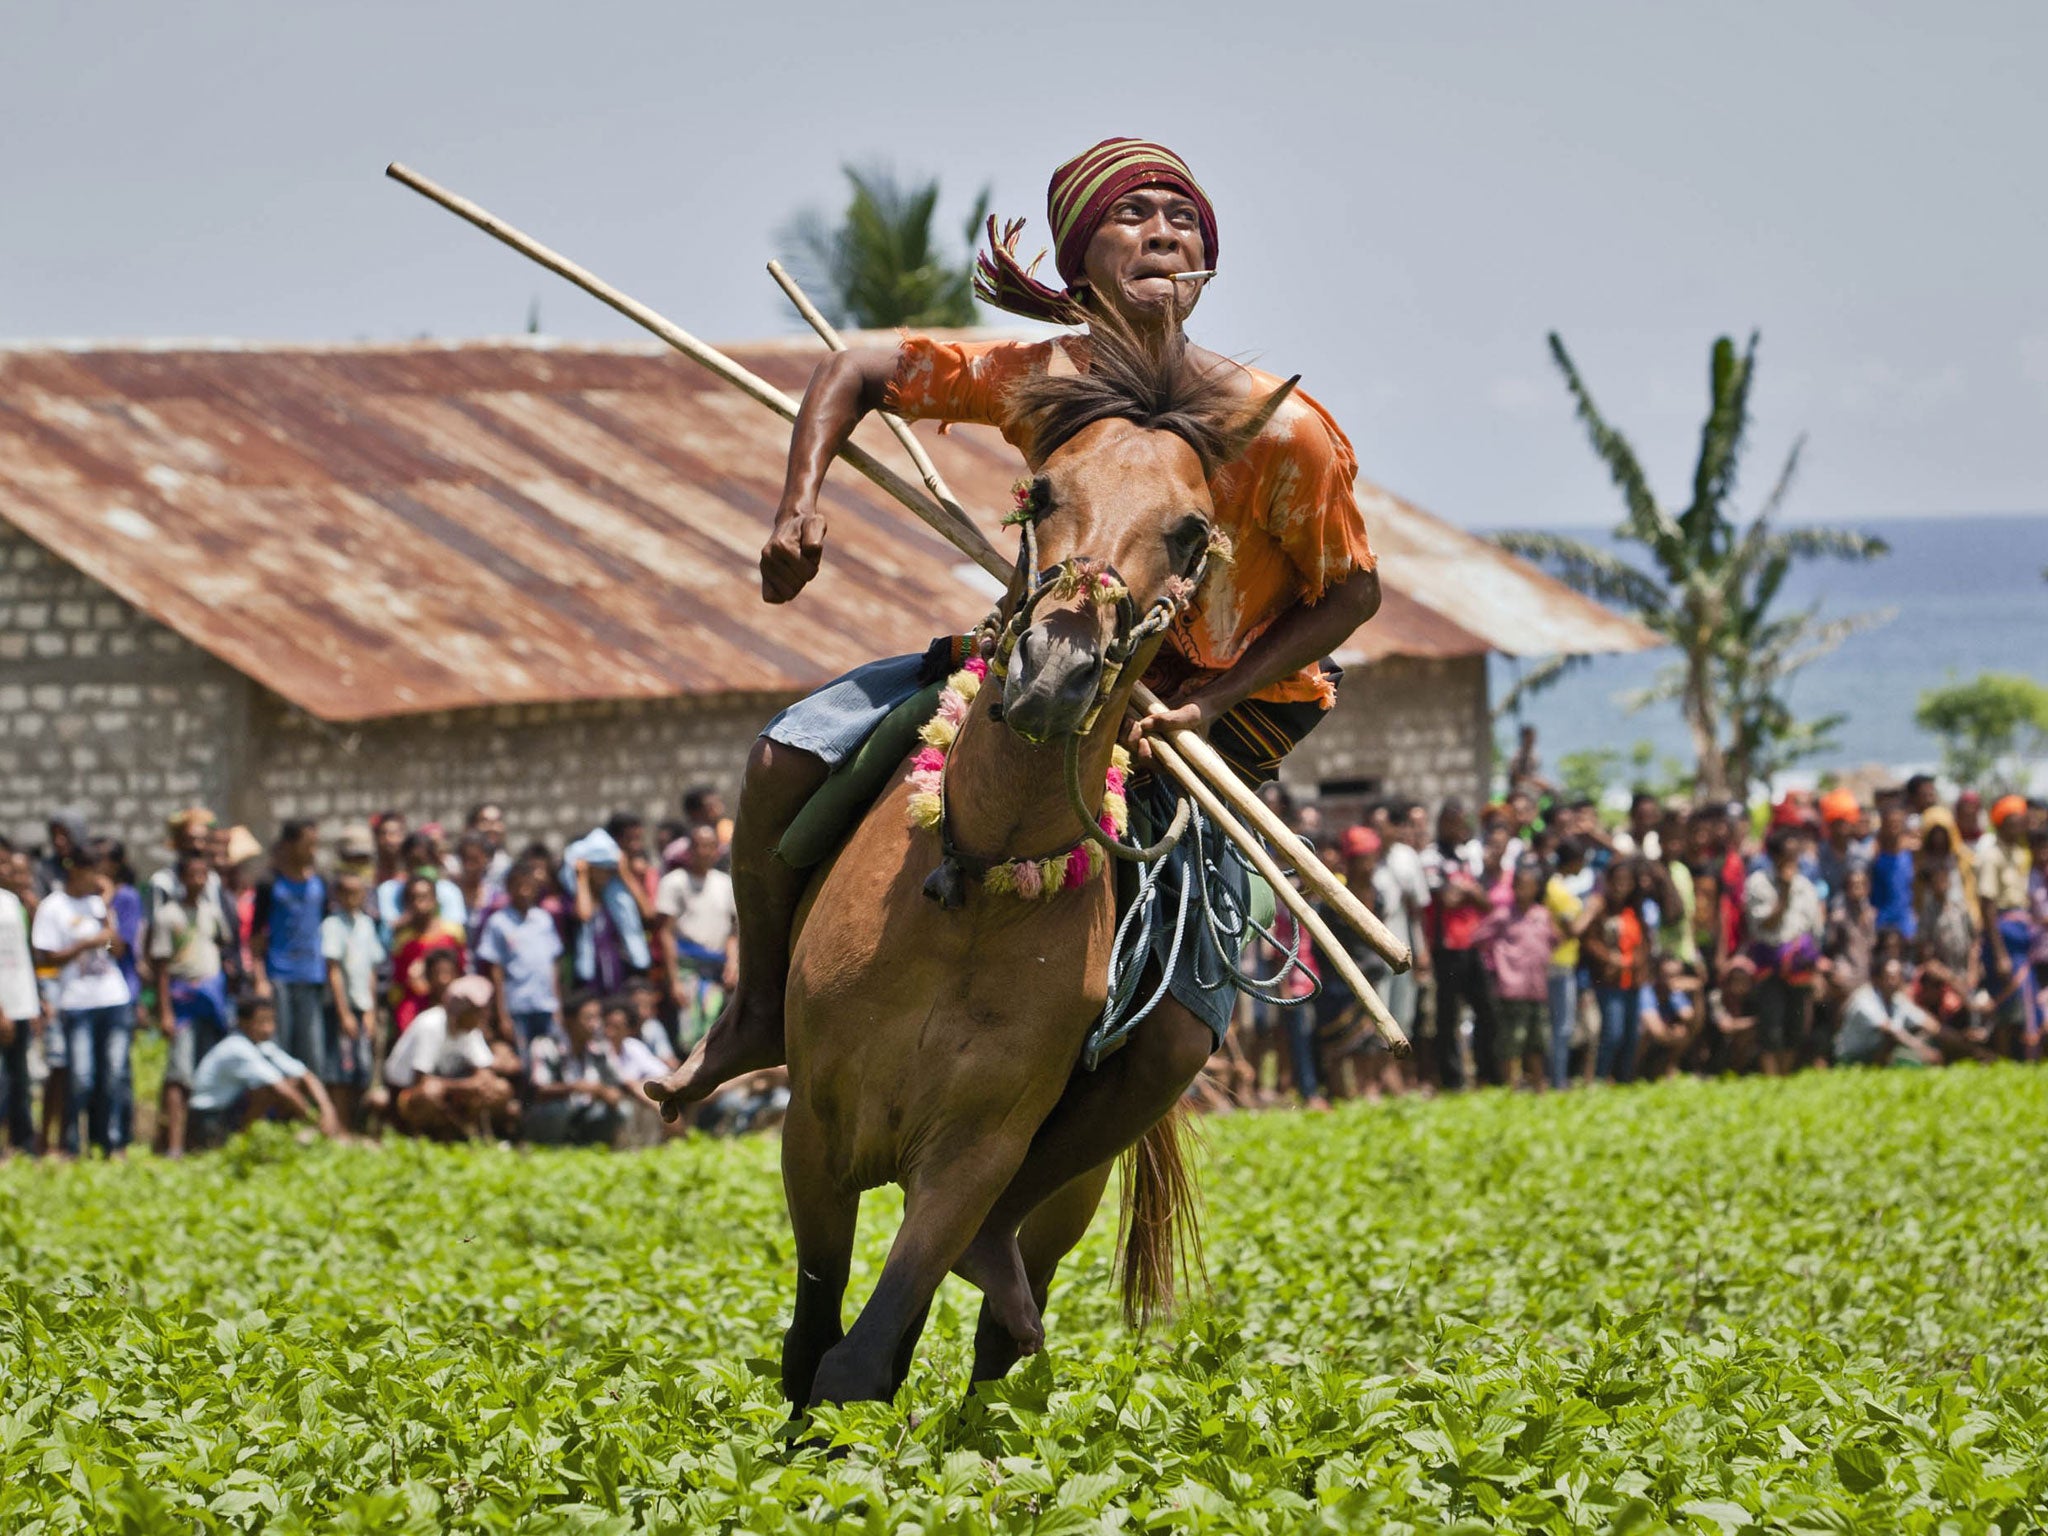 A Pasola rider reacts after throwing his spear during the Pasola war festival at Ratenggaro village in Sumba Island